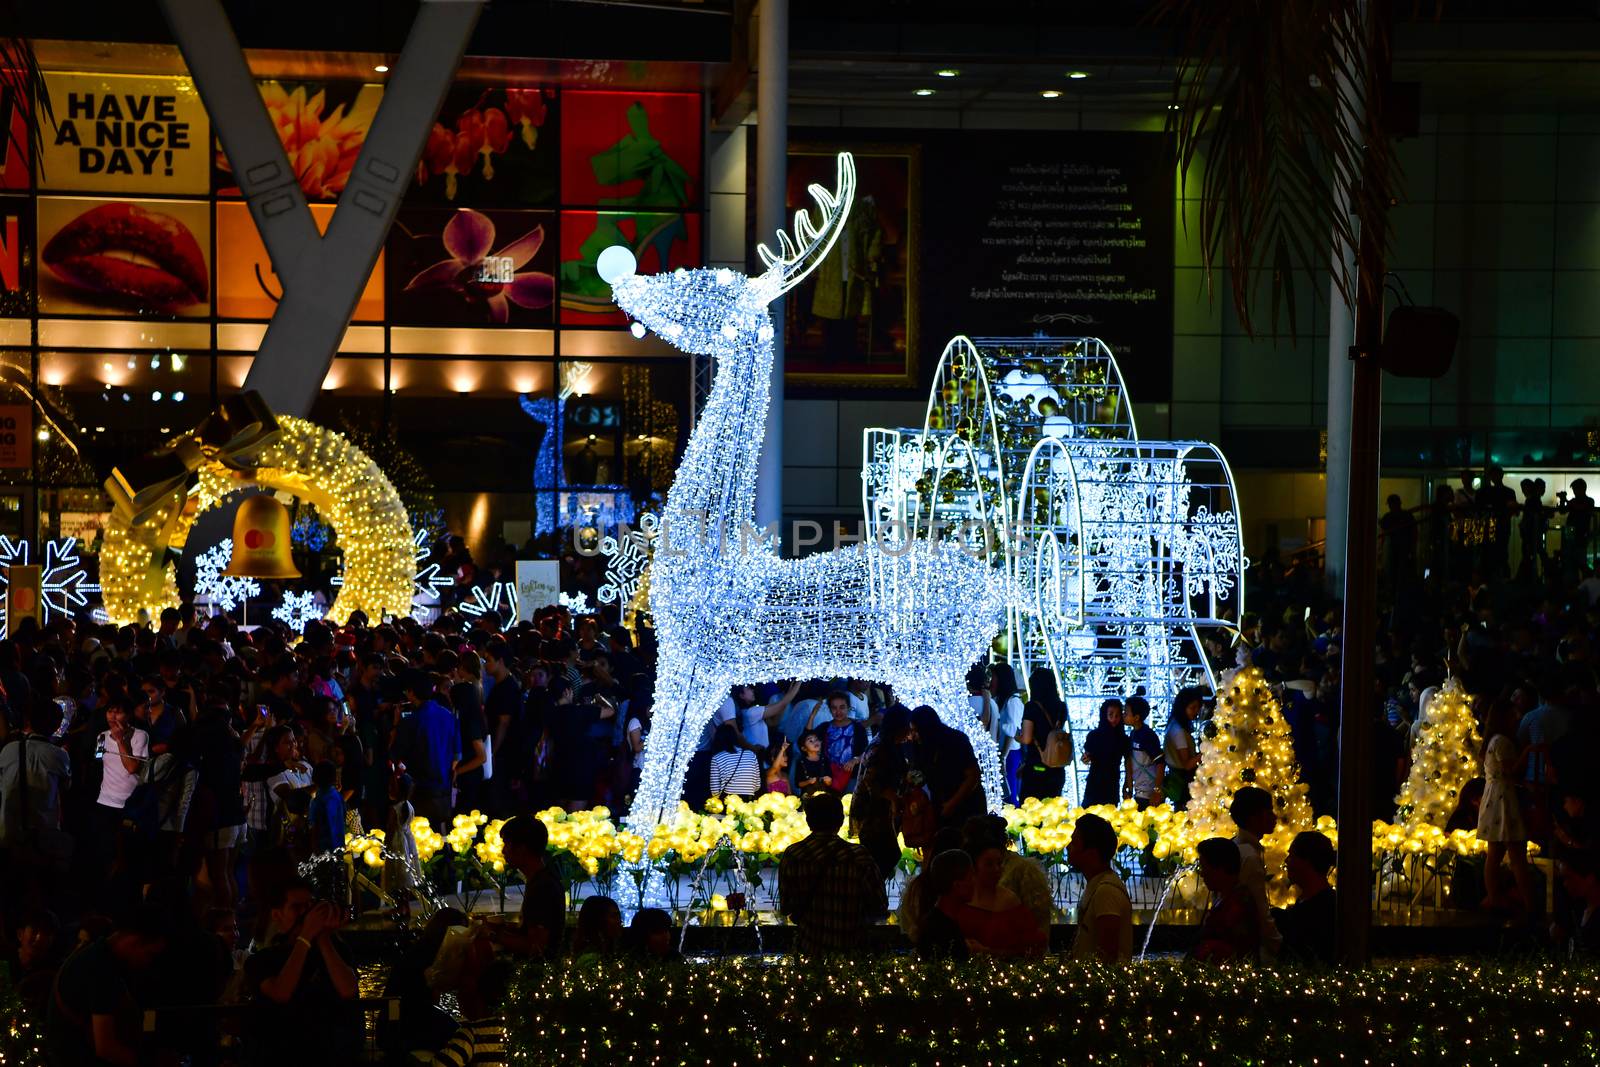 BANGKOK - DECEMBER 24 : Christmas decorated  light for Merry Christmas & Happy New Year 2017 at CentralWorld shopping mall on December 24, 2016 in Bangkok, Thailand.